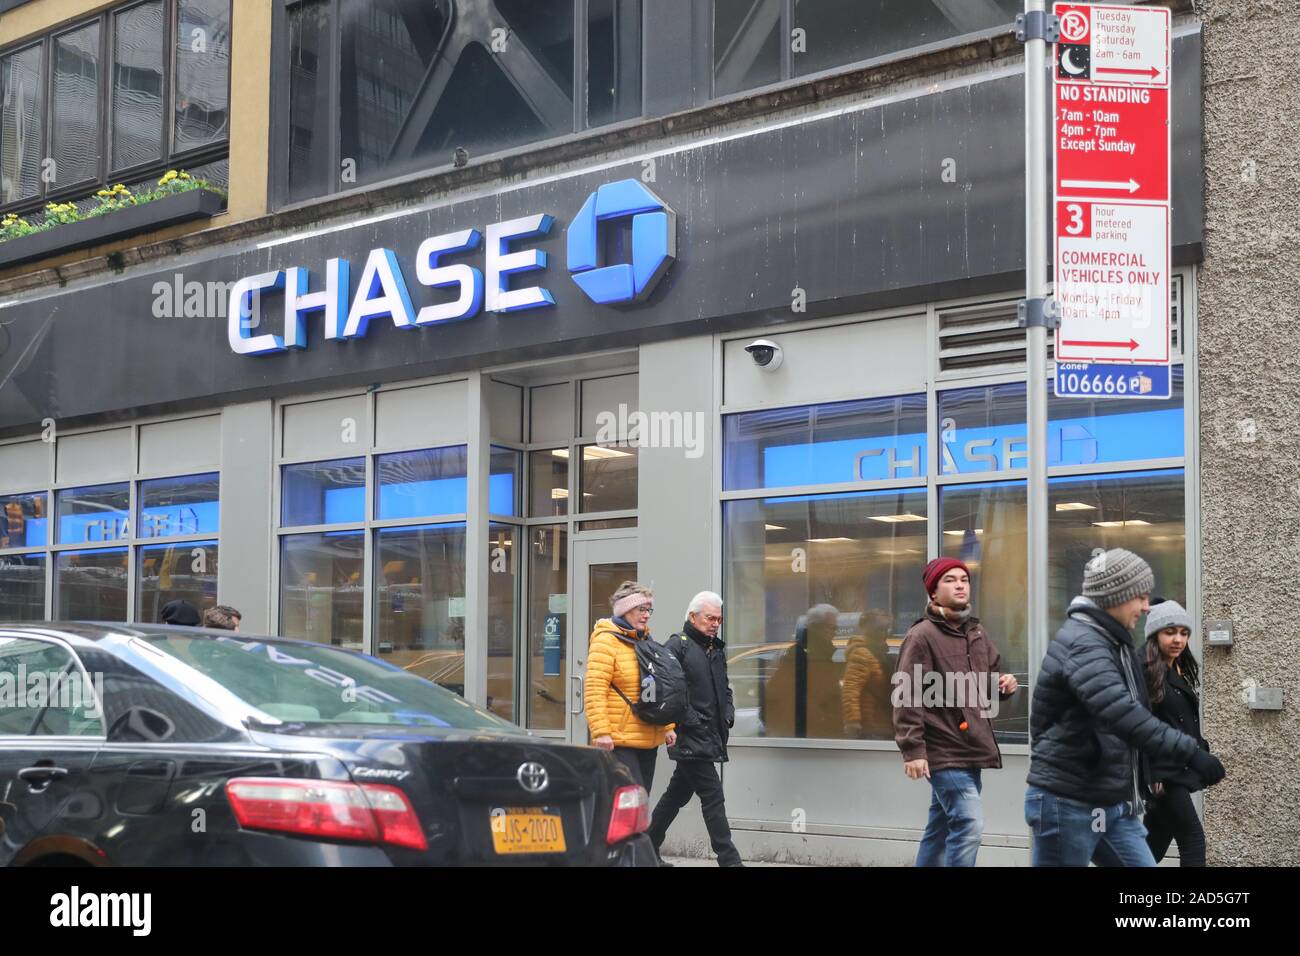 New York November 28 2019:  The Chase bank sign at One Chase Manhattan Plaza in New York City,- Image Stock Photo